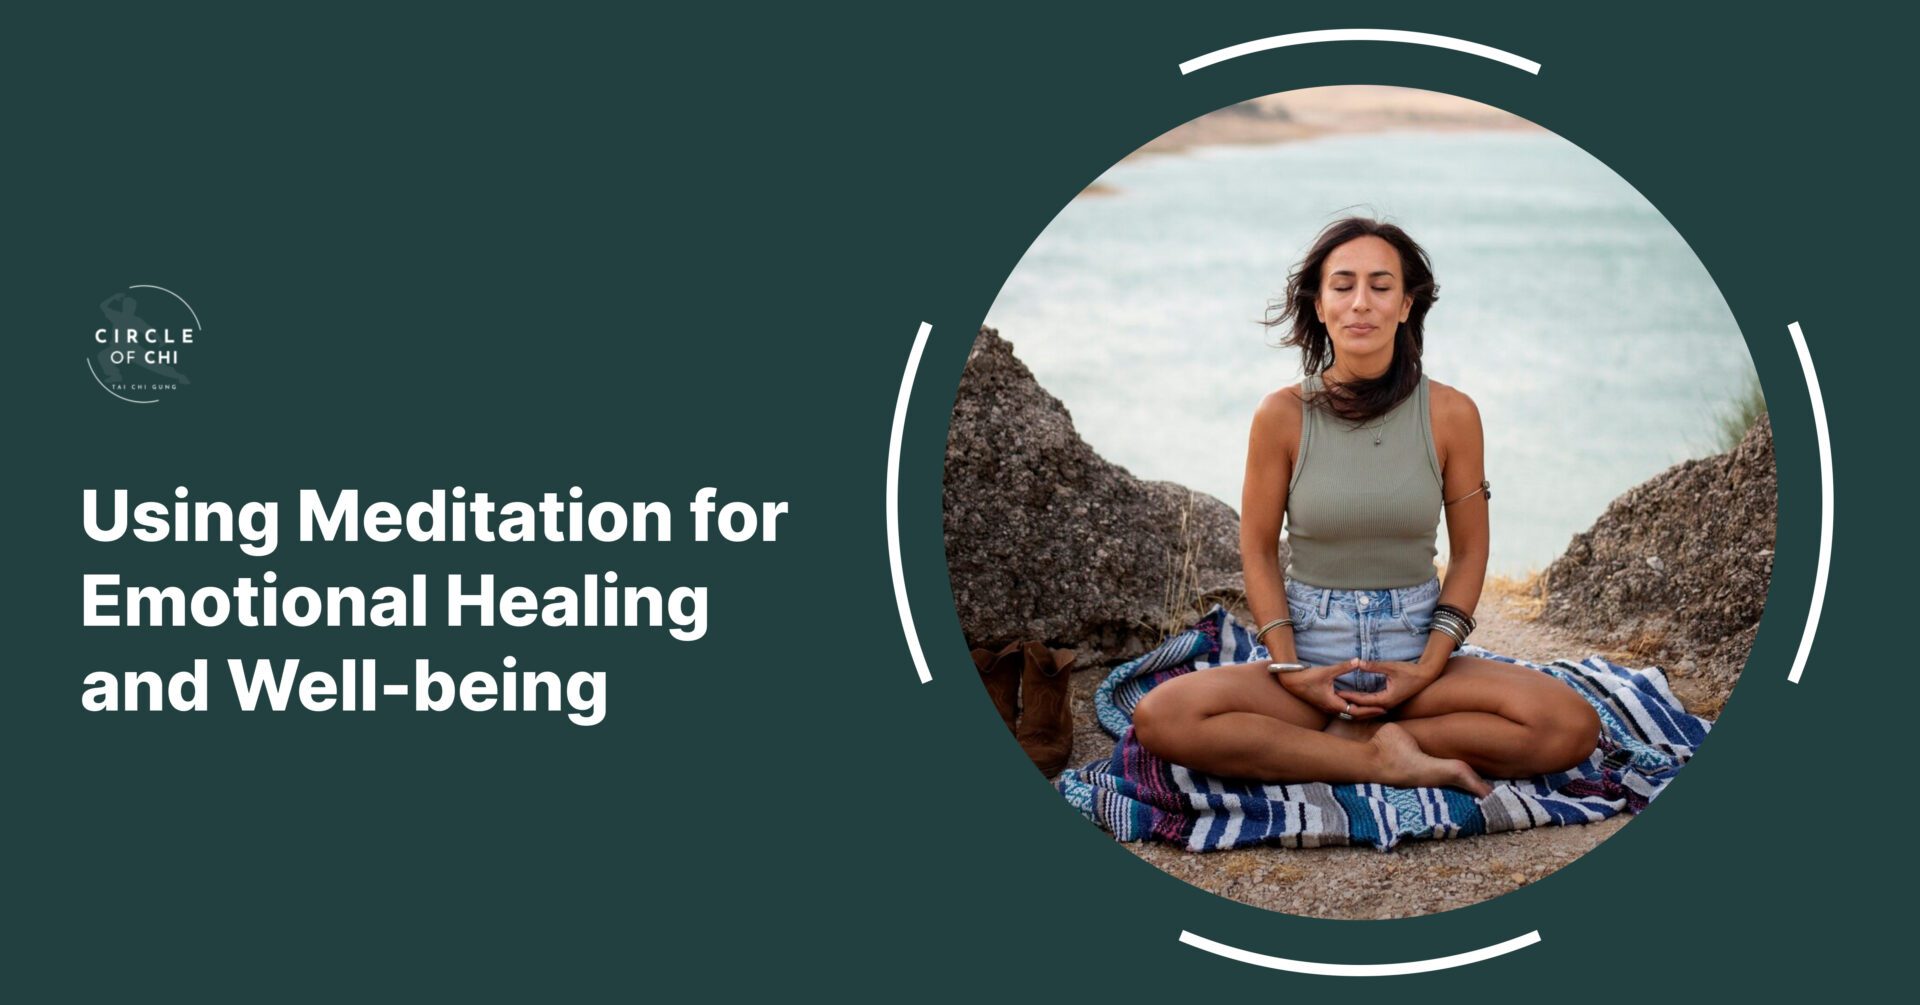 Using Meditation for Emotional Healing and Well-being